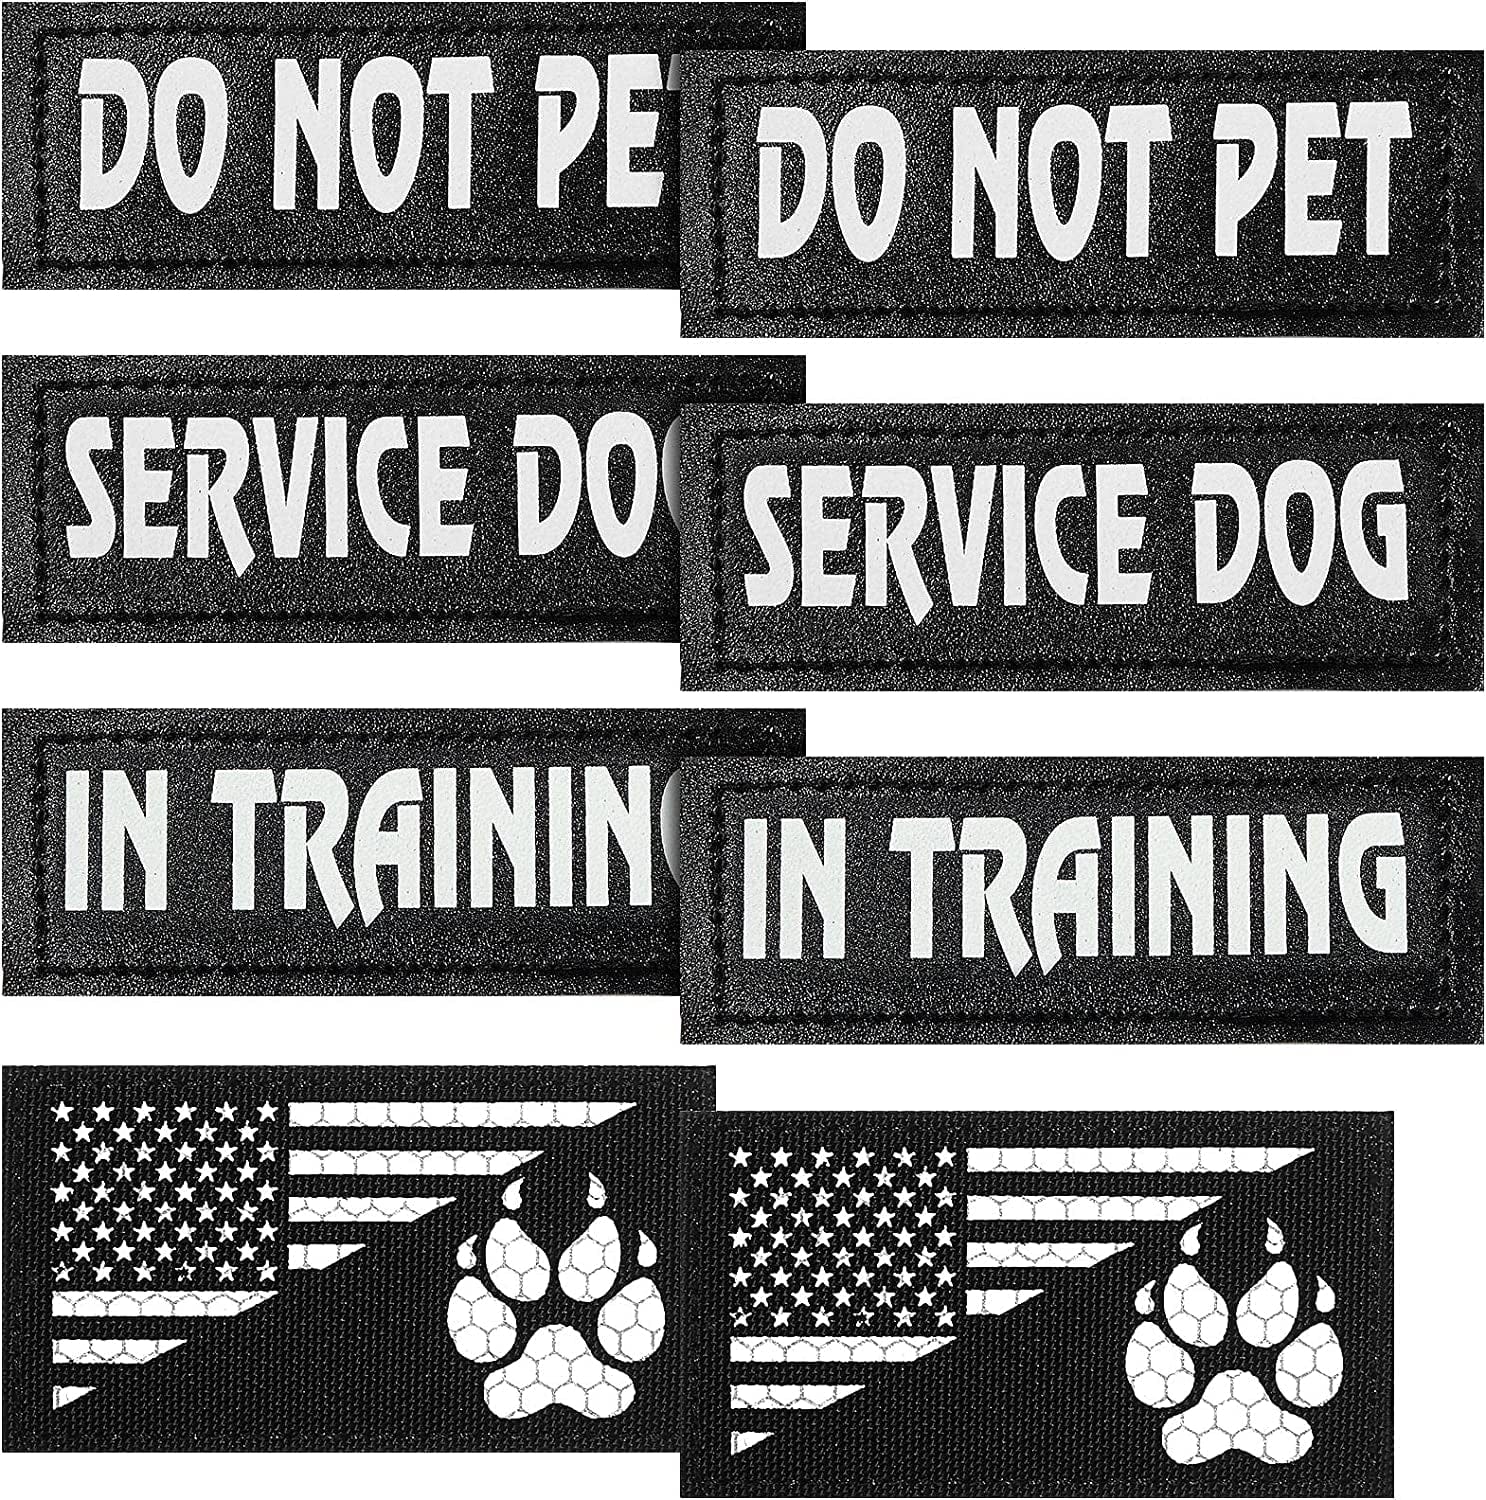 4 Pcs Reflective Dog Patches for Service Dog Vest Tactical Hook Loop  Harness Removable Patch Set with Velcro Embroidered,Service Dog in Training  